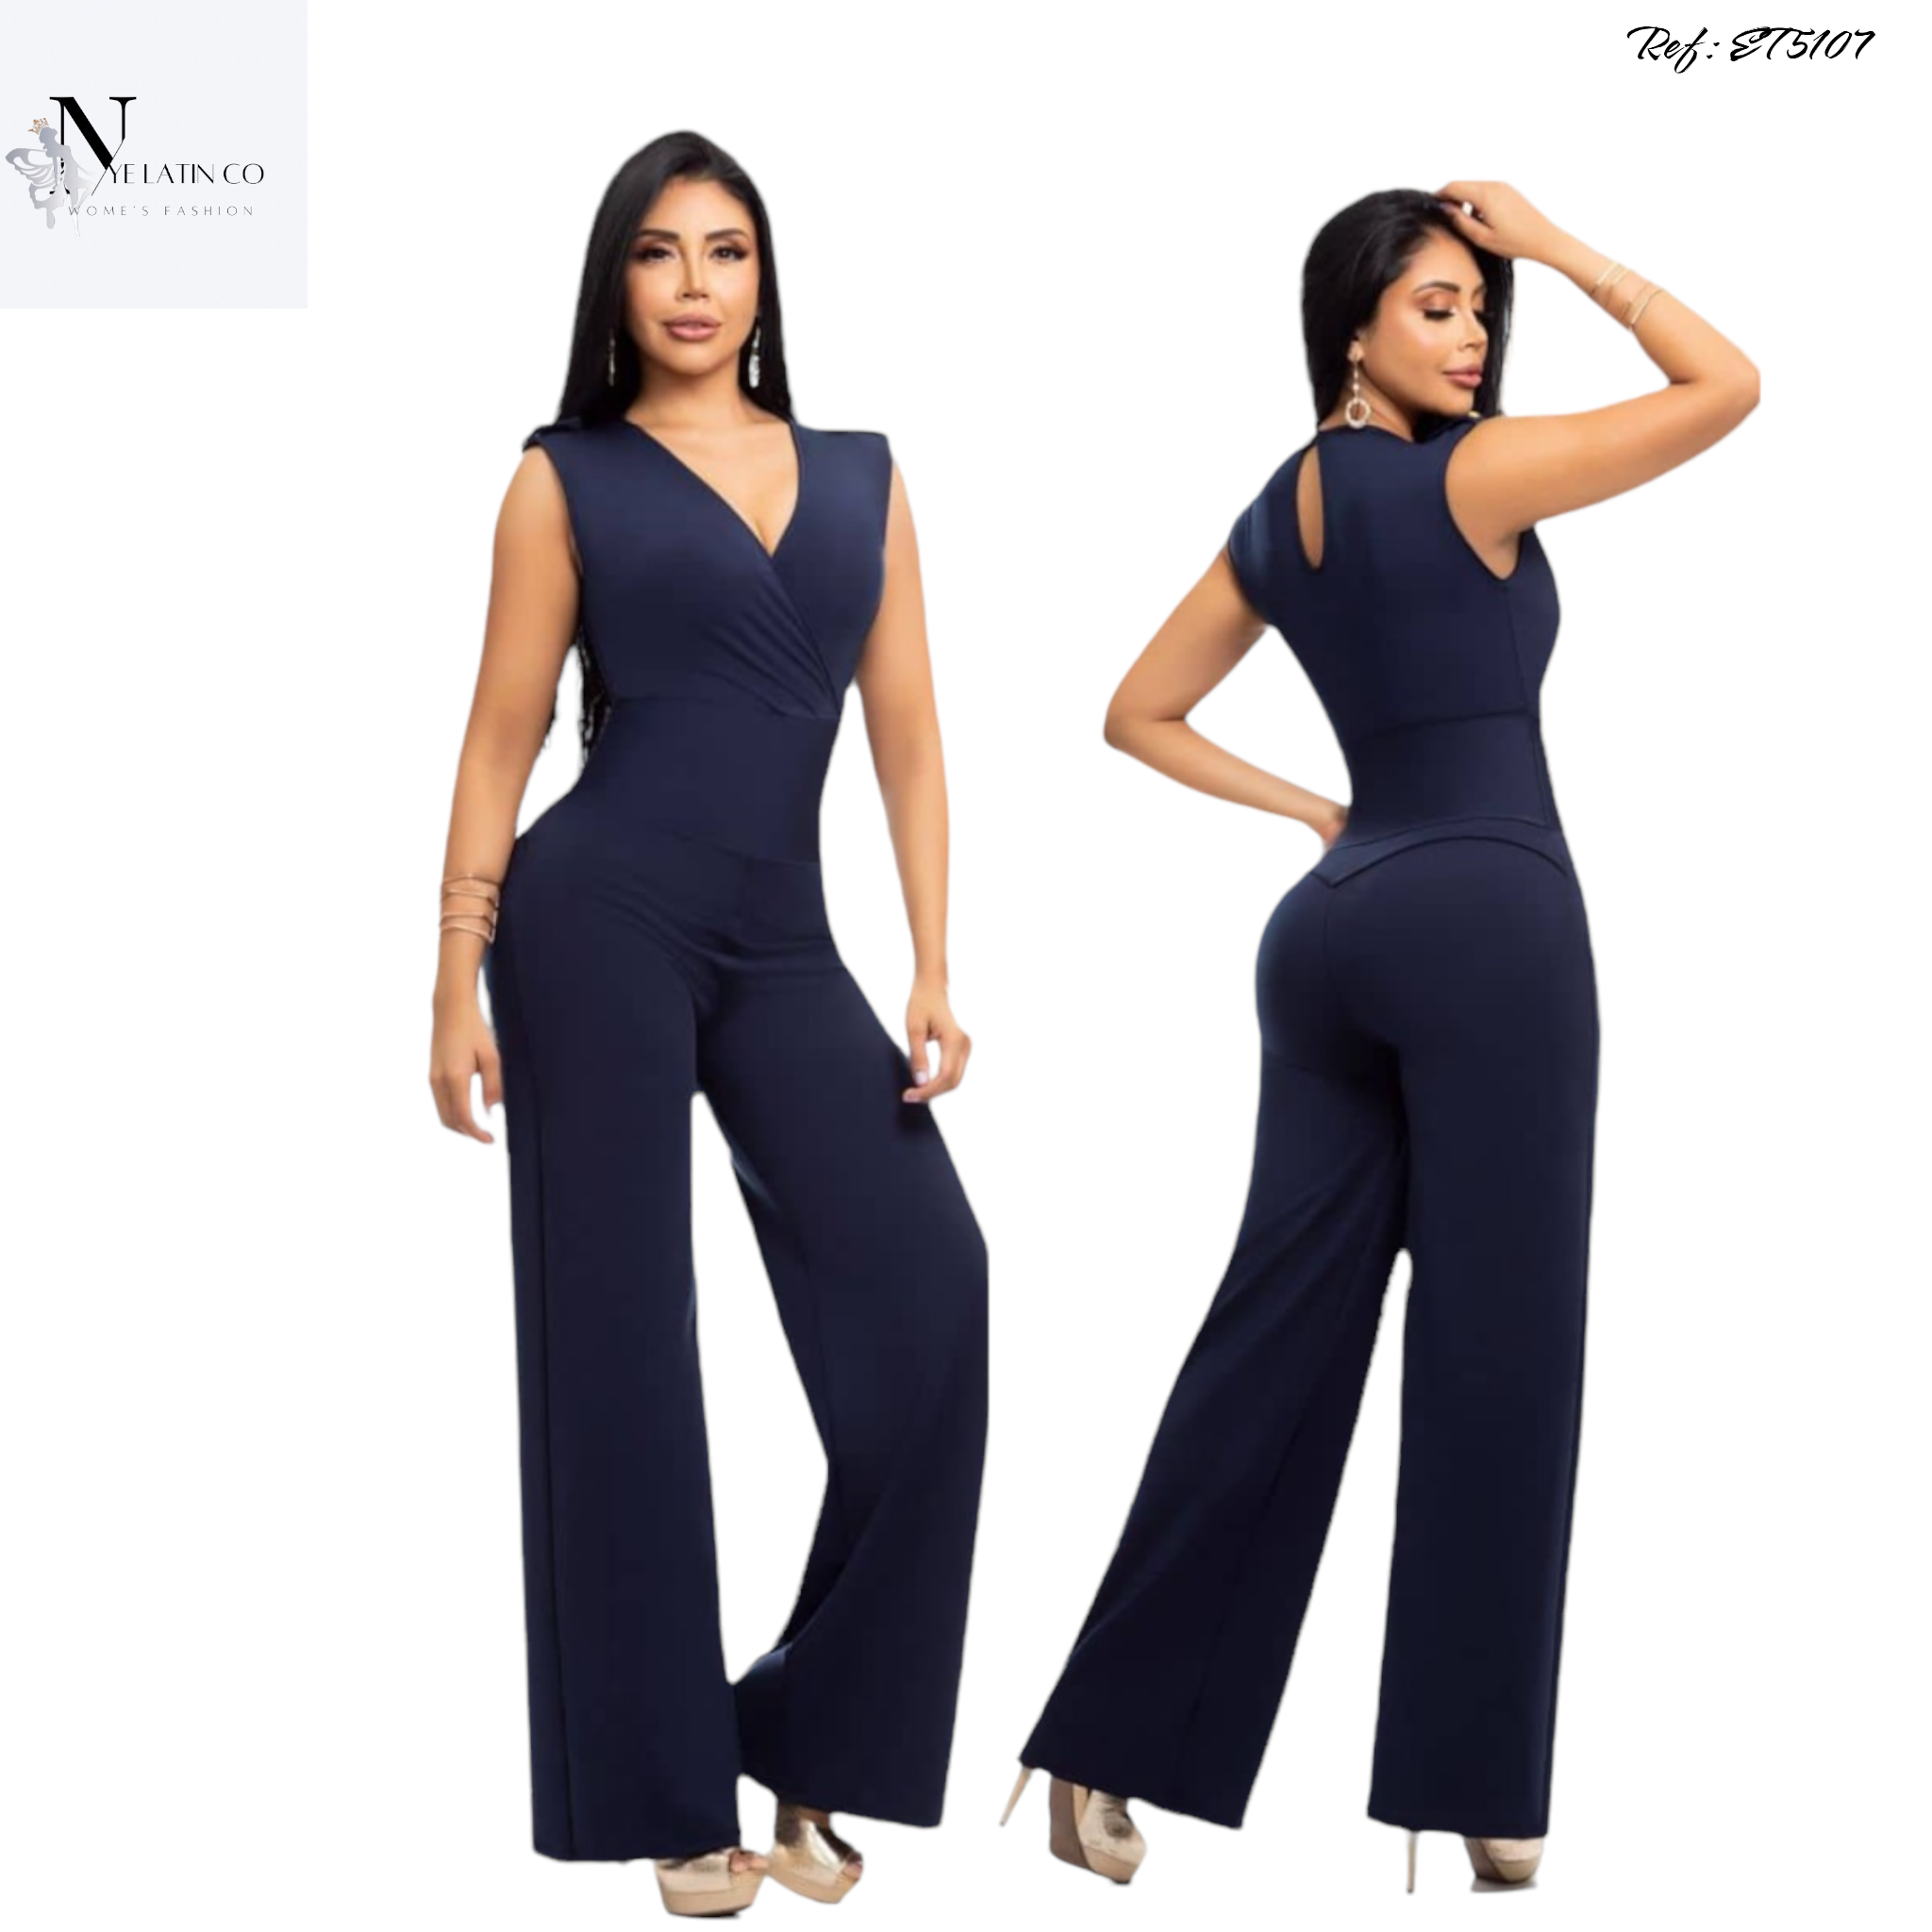 JUMPSUIT, ROMPER, ONE PIECE & TWO/TREE PIECES SET – NYE Latin Co.